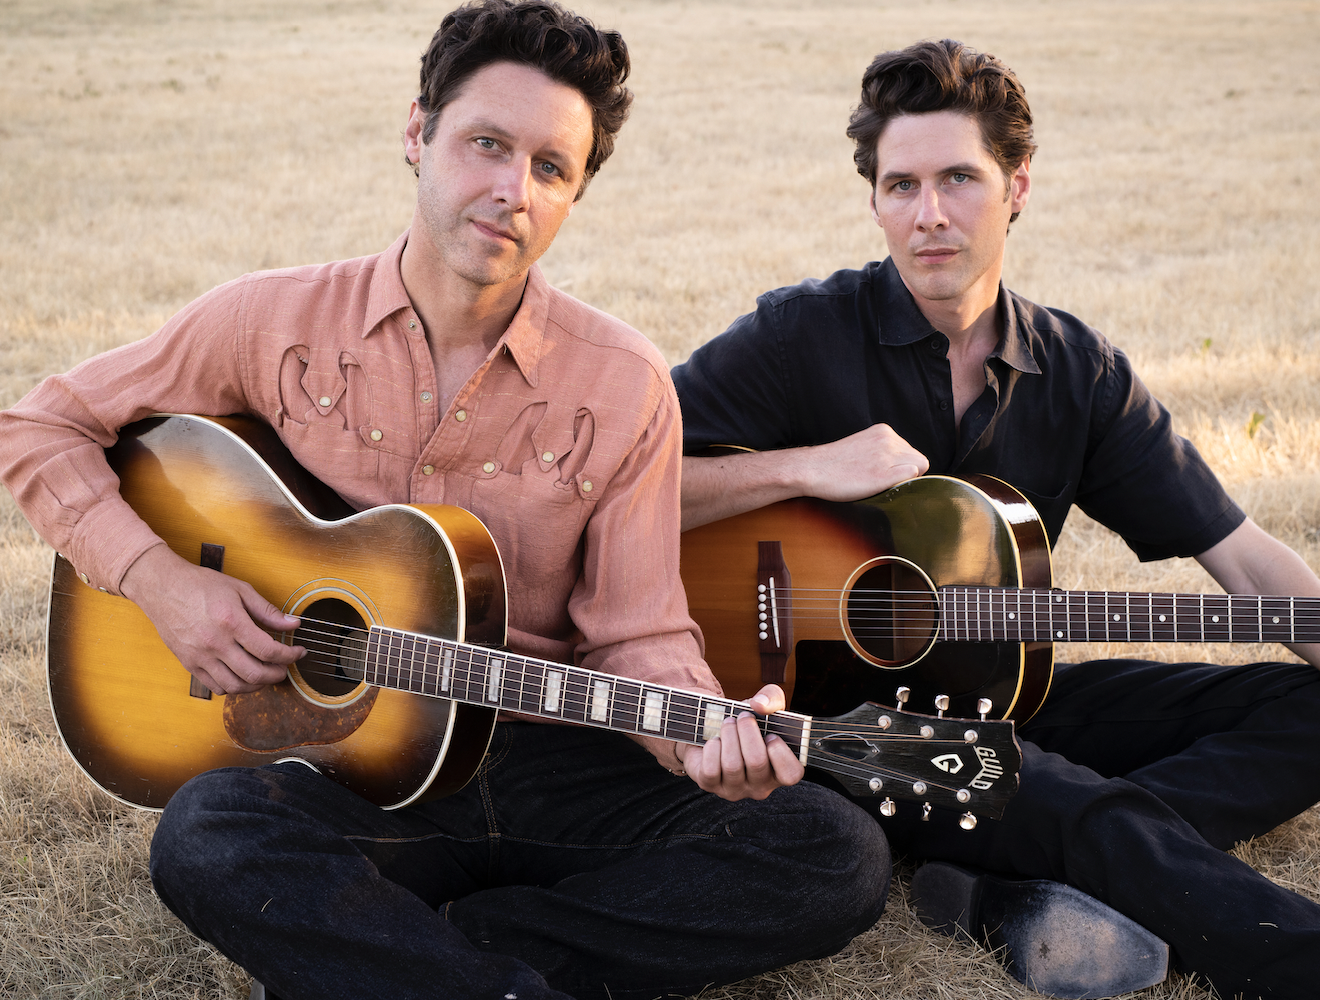 The Cactus Blossoms Promo image - two musicians with guitars